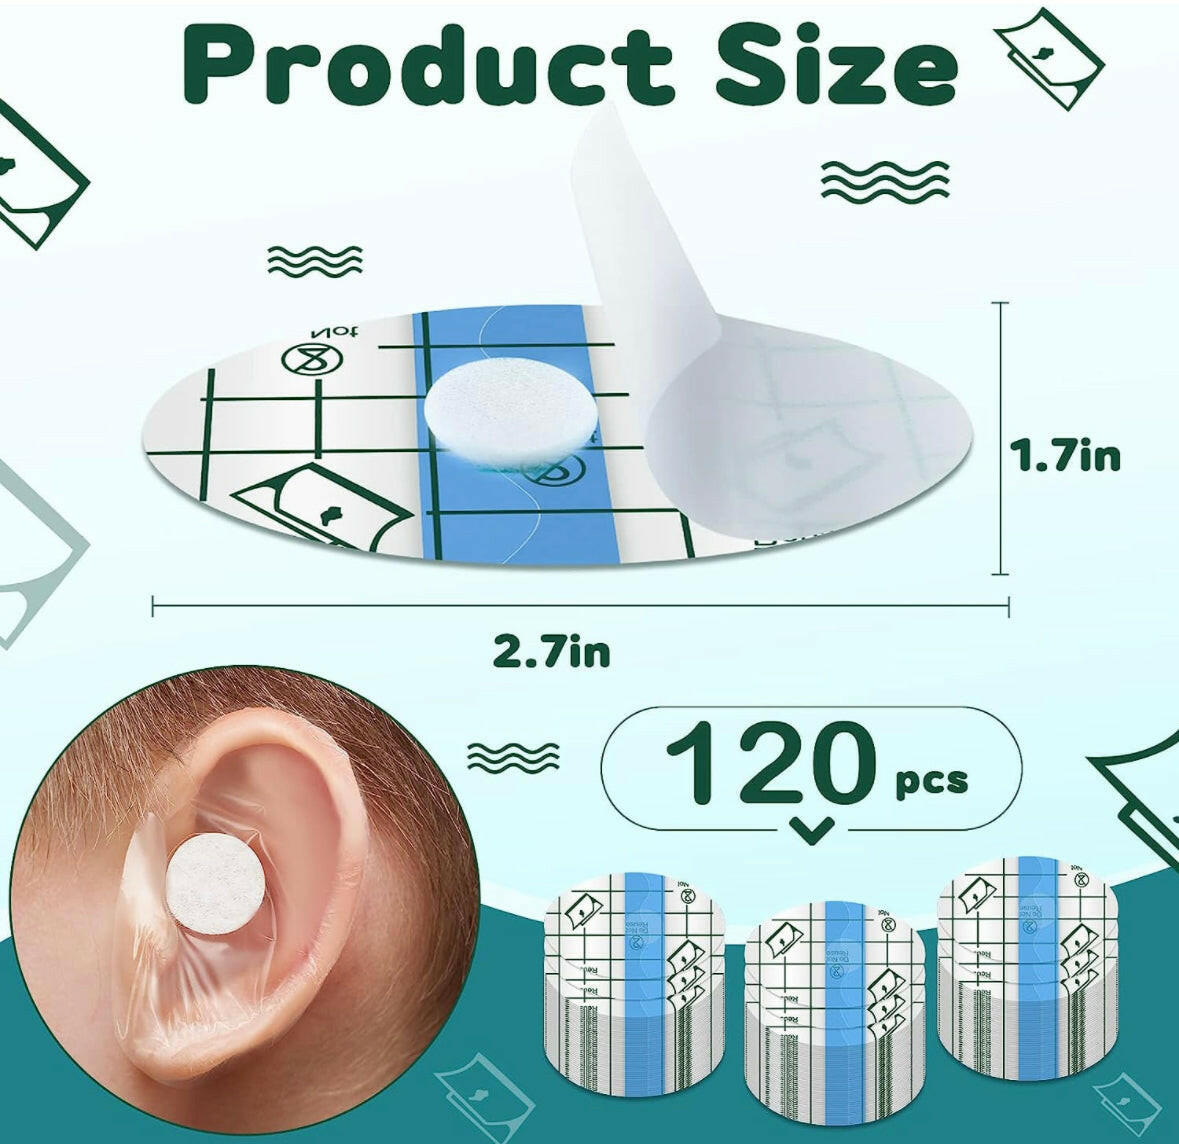 120 Pieces Ear Covers Waterproof for Baby.